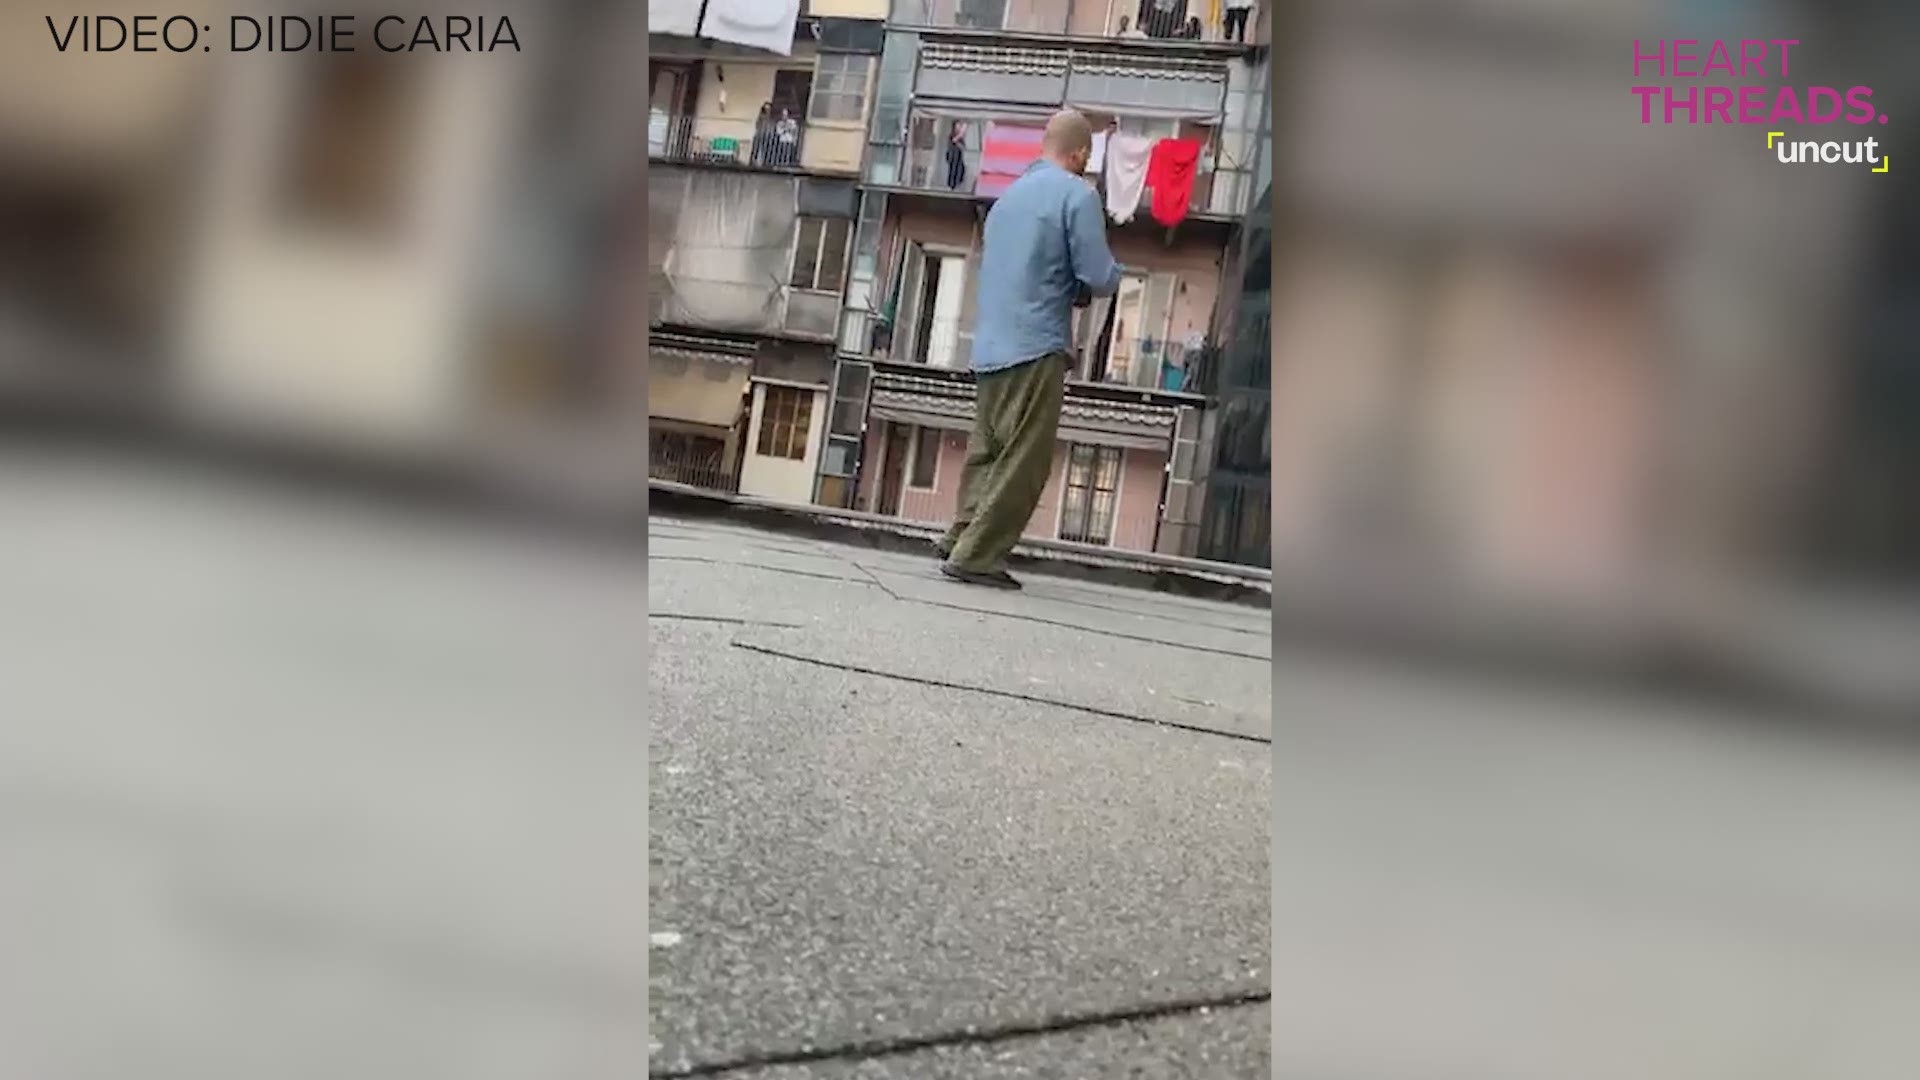 This Italian musician performed 'Can't Help Falling In Love' on a balcony for his neighbors in isolation because of the coronavirus.